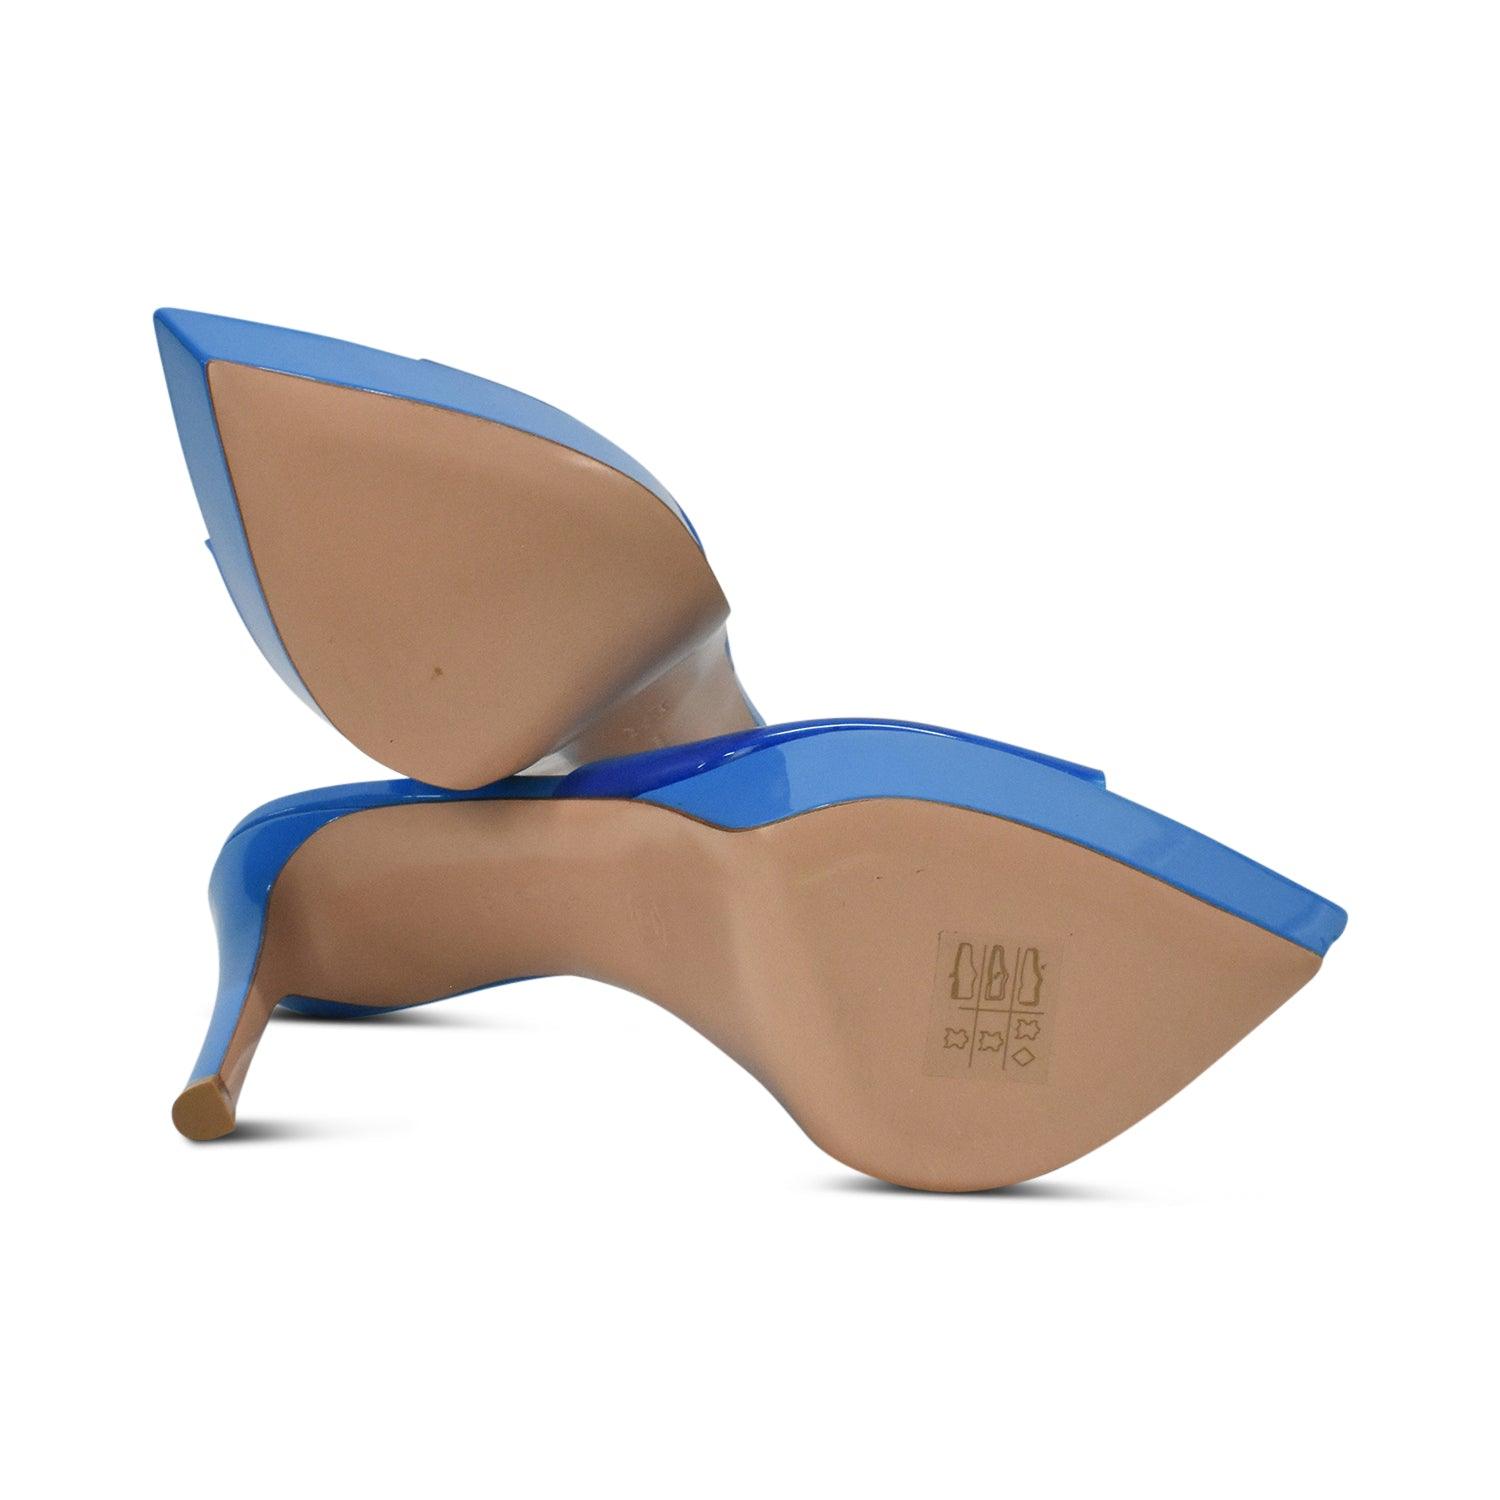 Gianvito Rossi Mules - Women's 37.5 - Fashionably Yours